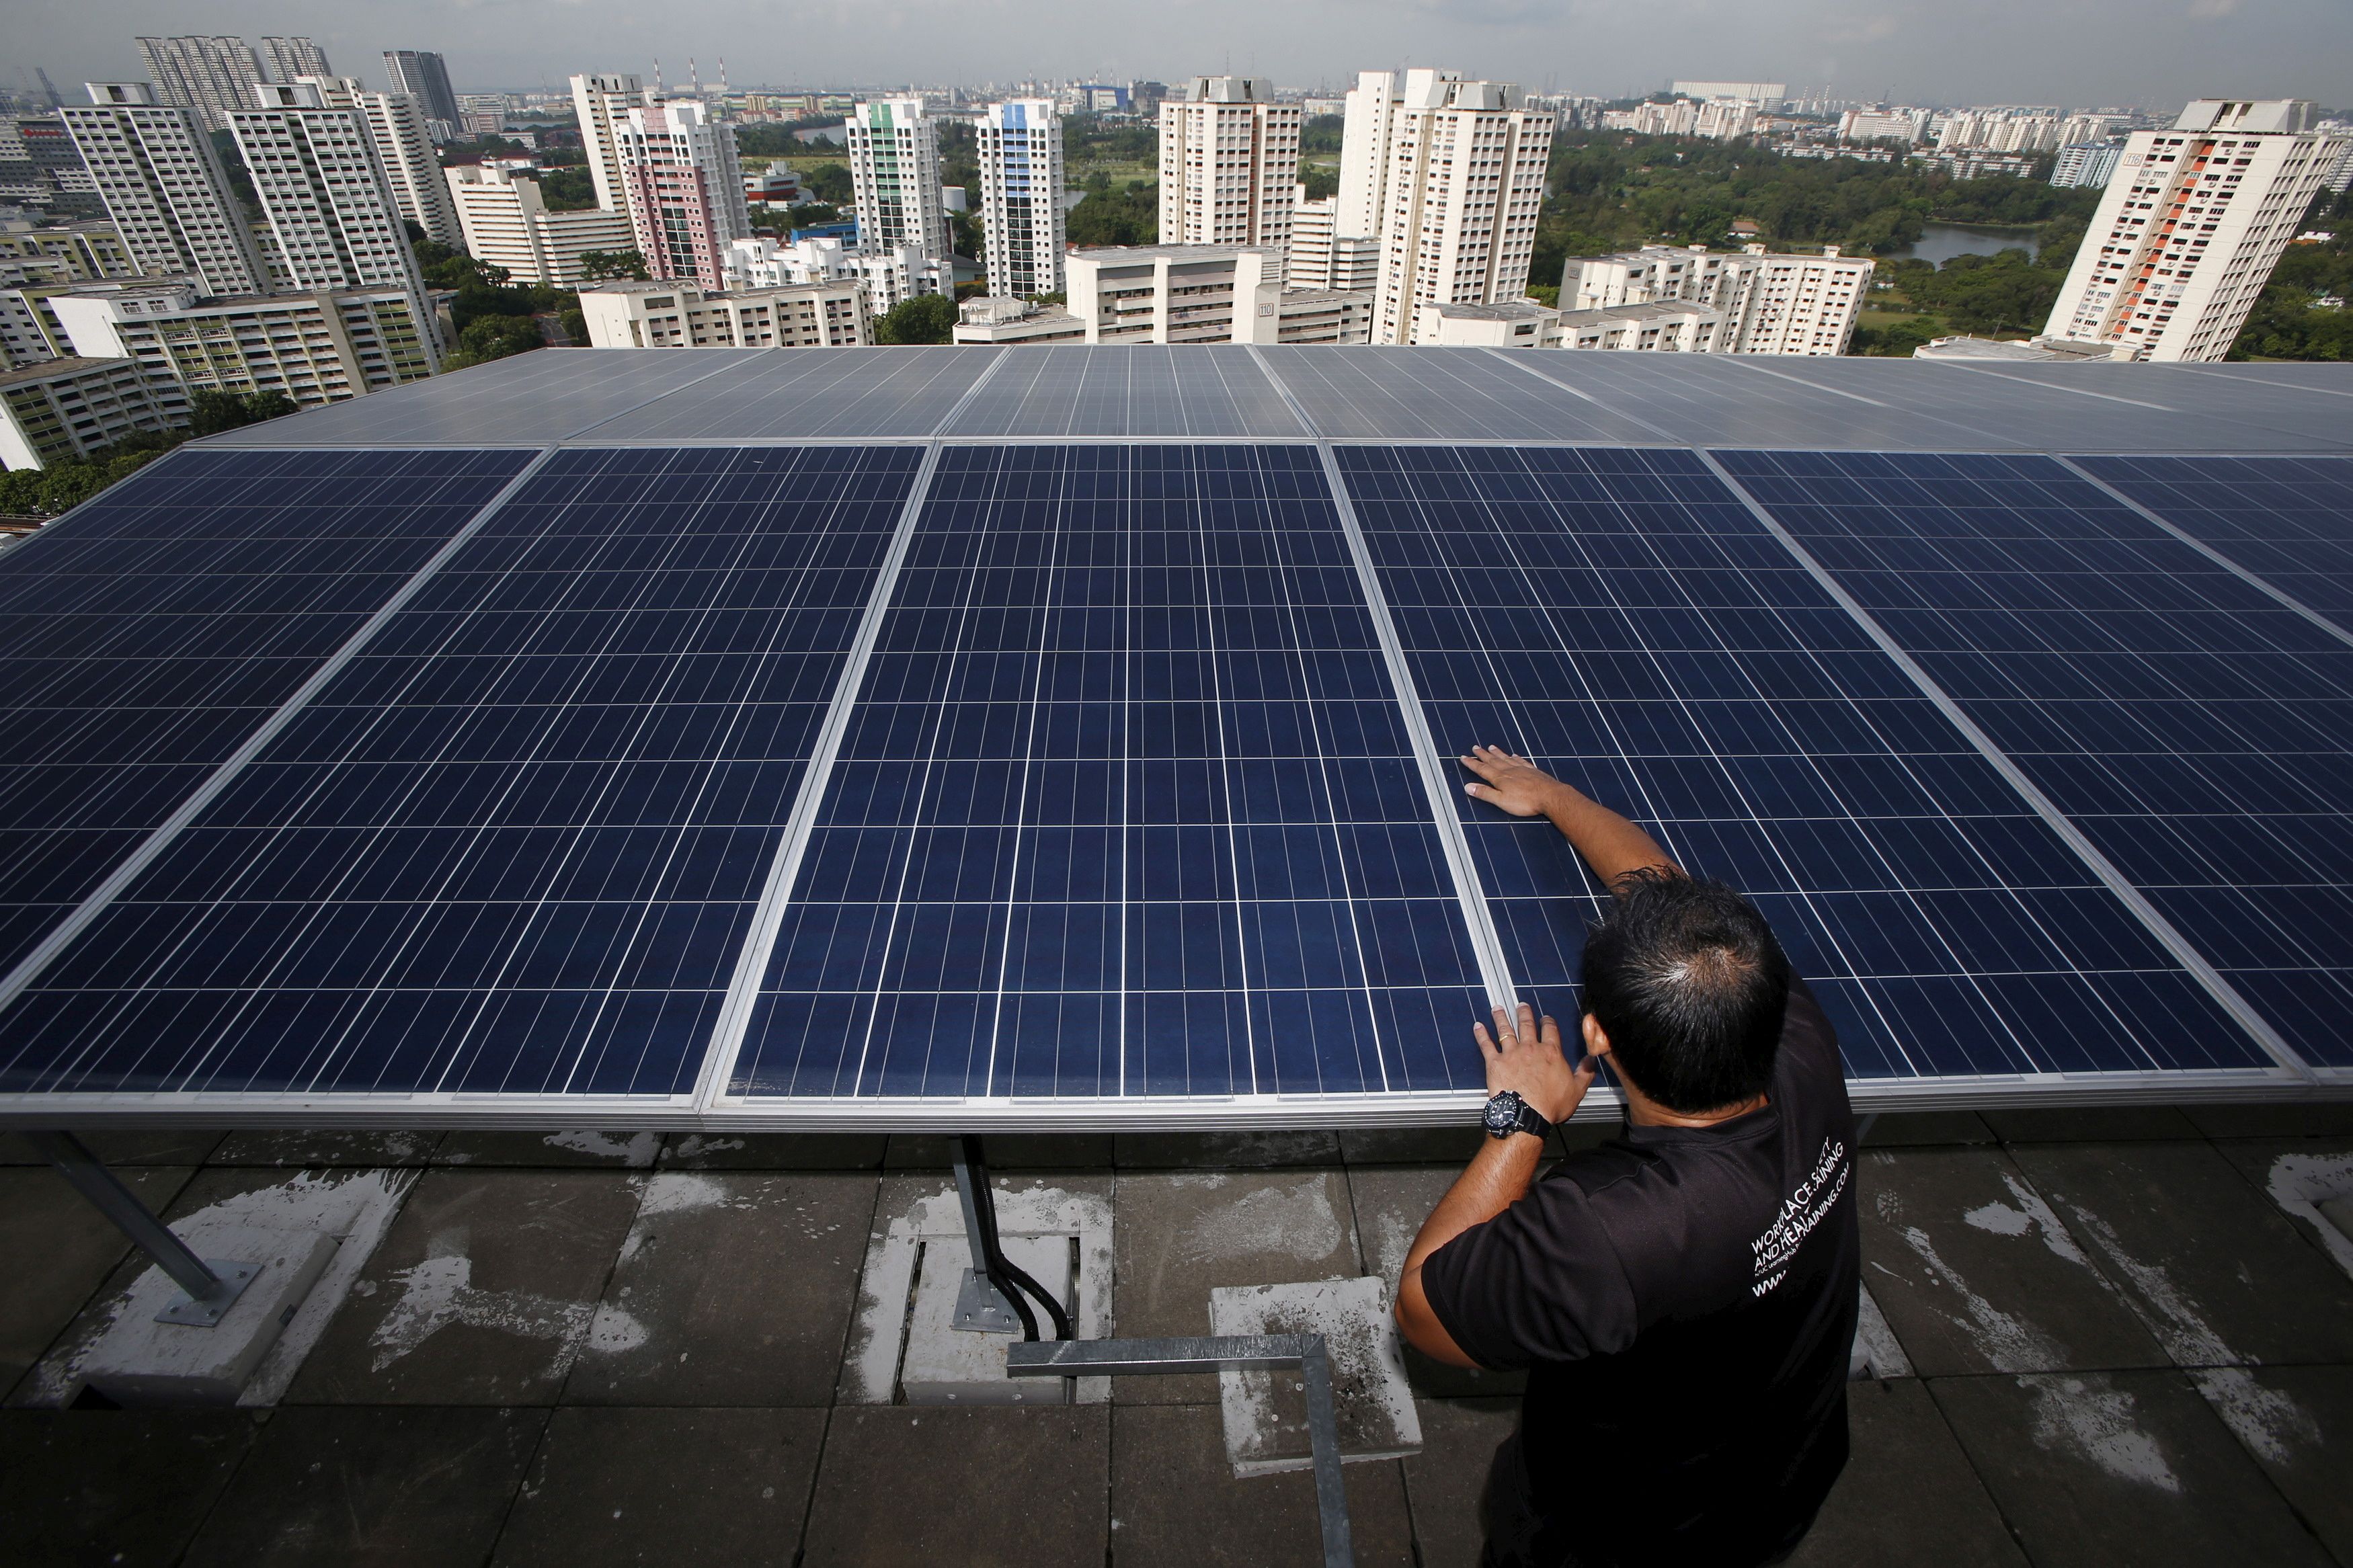 Maintenance officer Wilson Ting of Sunseap Leasing inspects photovoltaic solar modules on top of a block of Housing Development Board (HDB) public housing estate apartments in Singapore April 15, 2015. REUTERS/Edgar Su